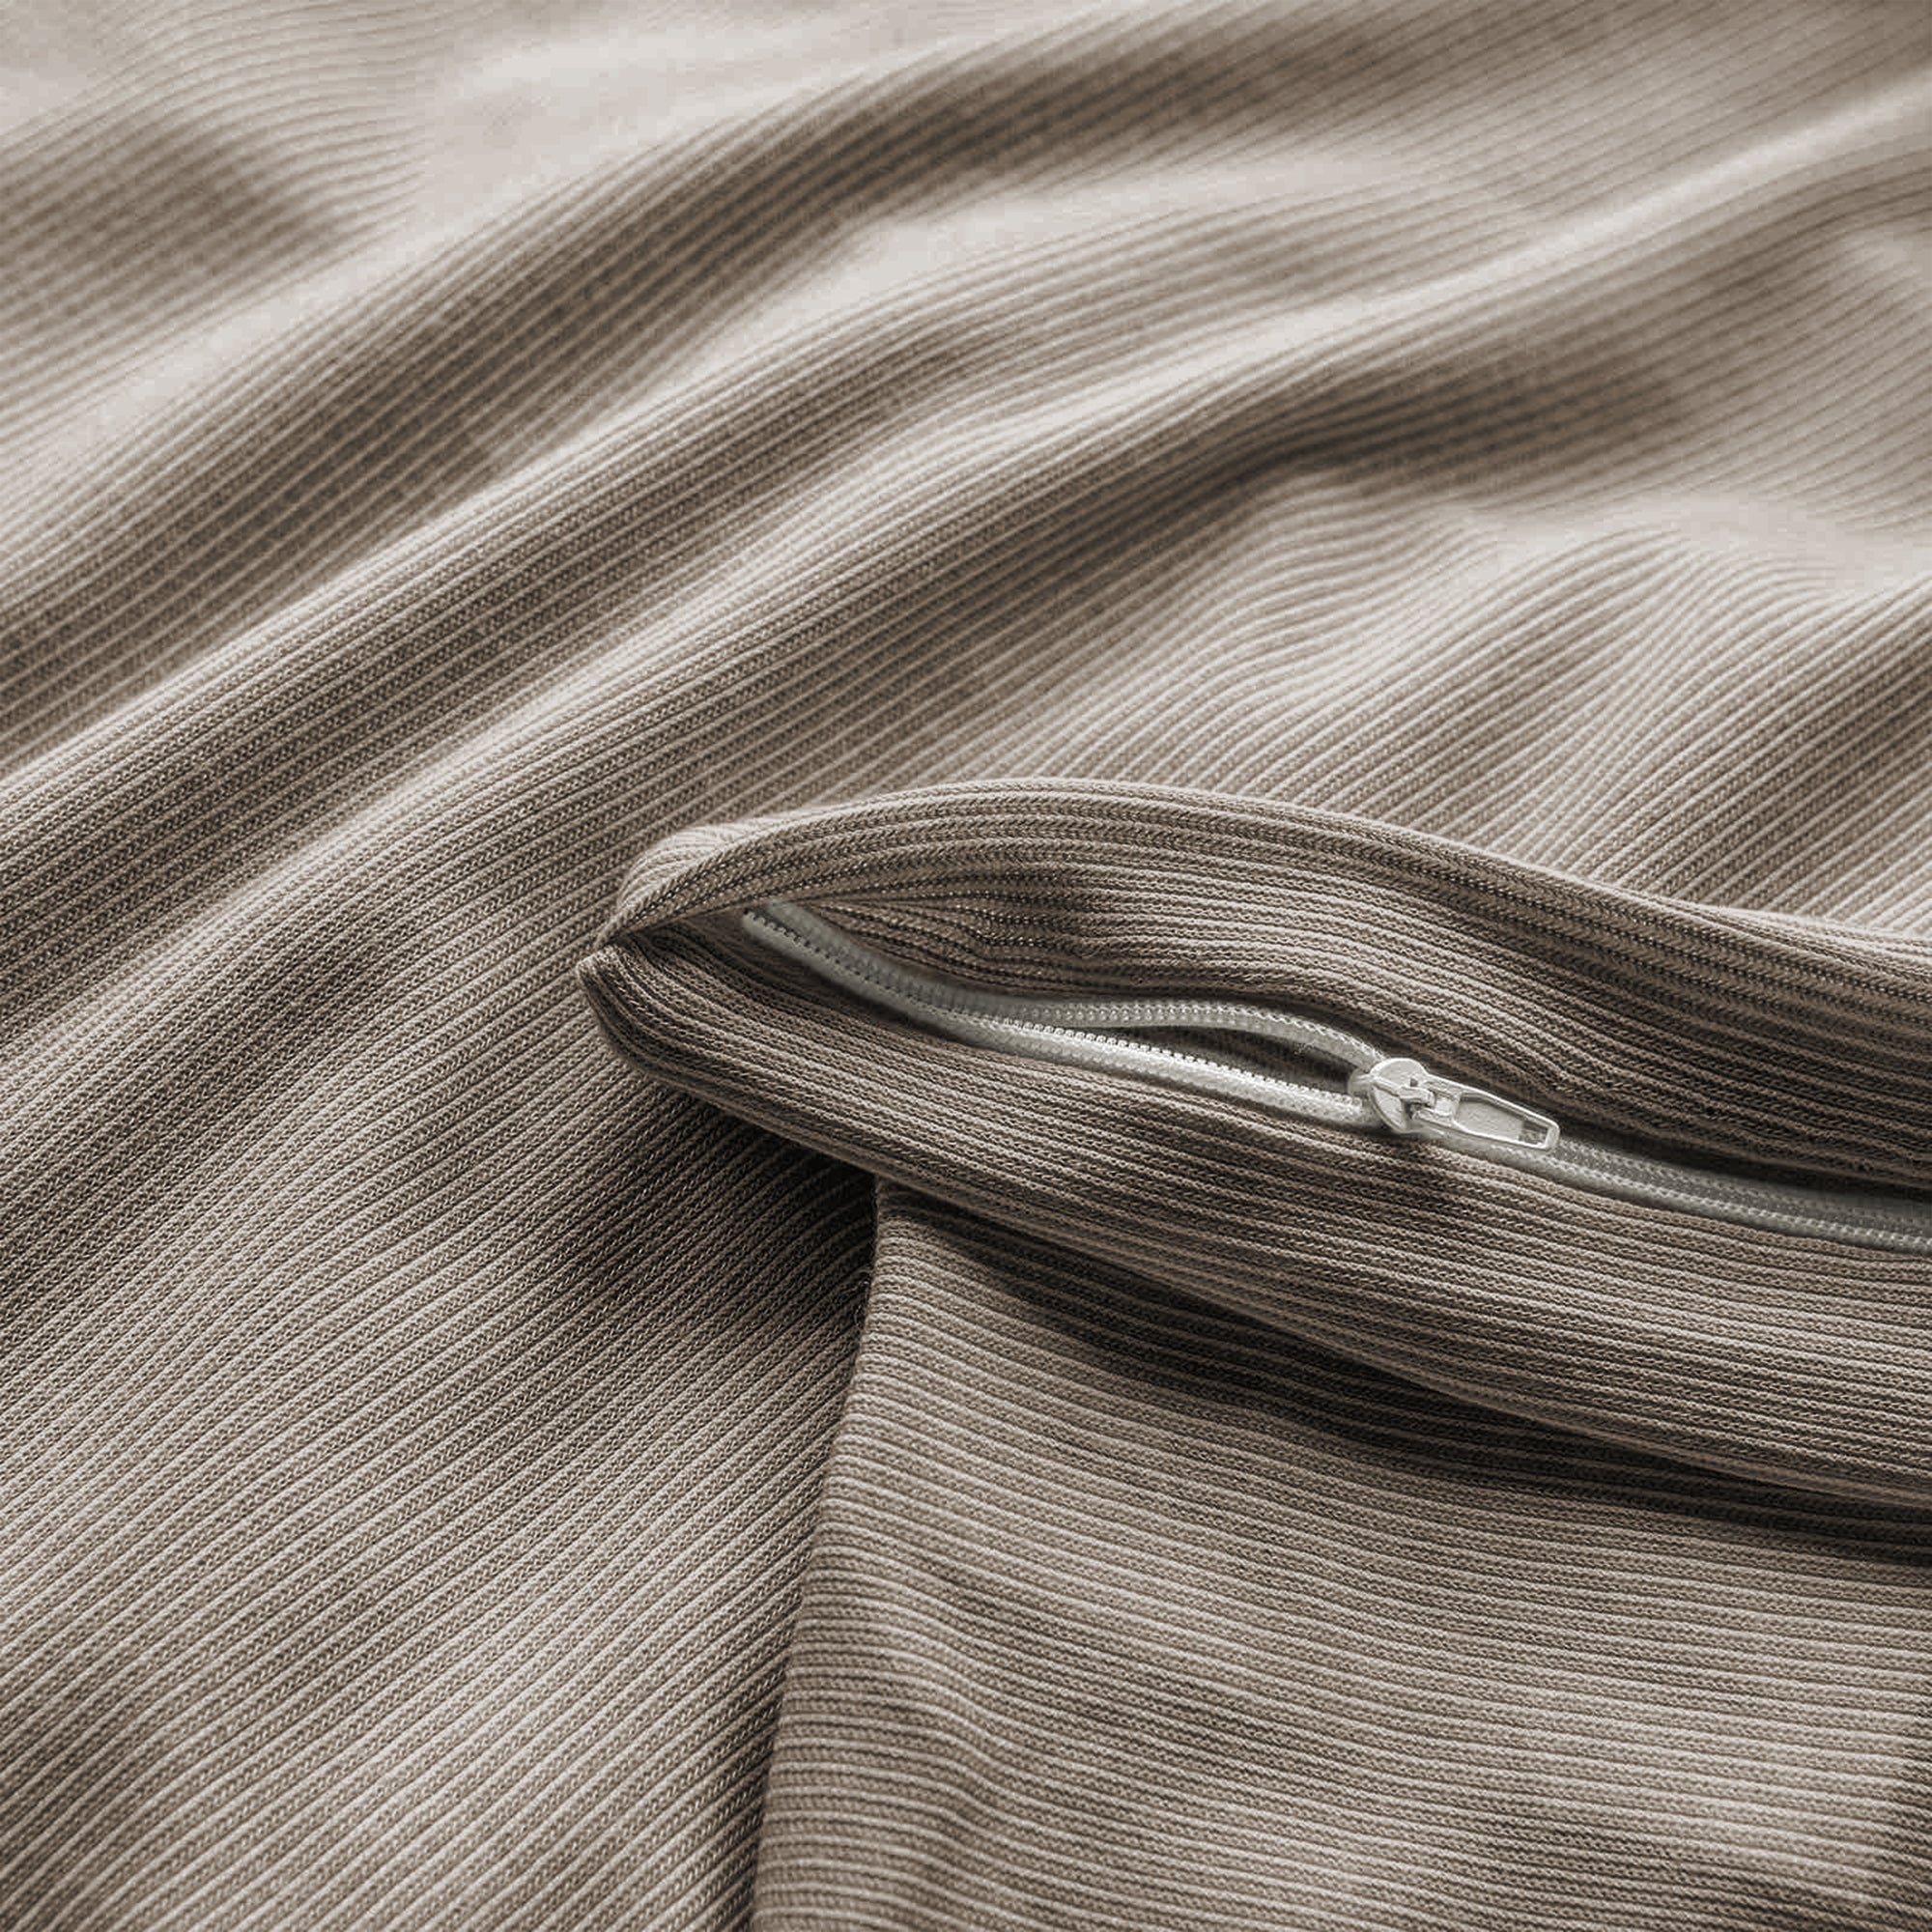 What is thread count and why does it matter?